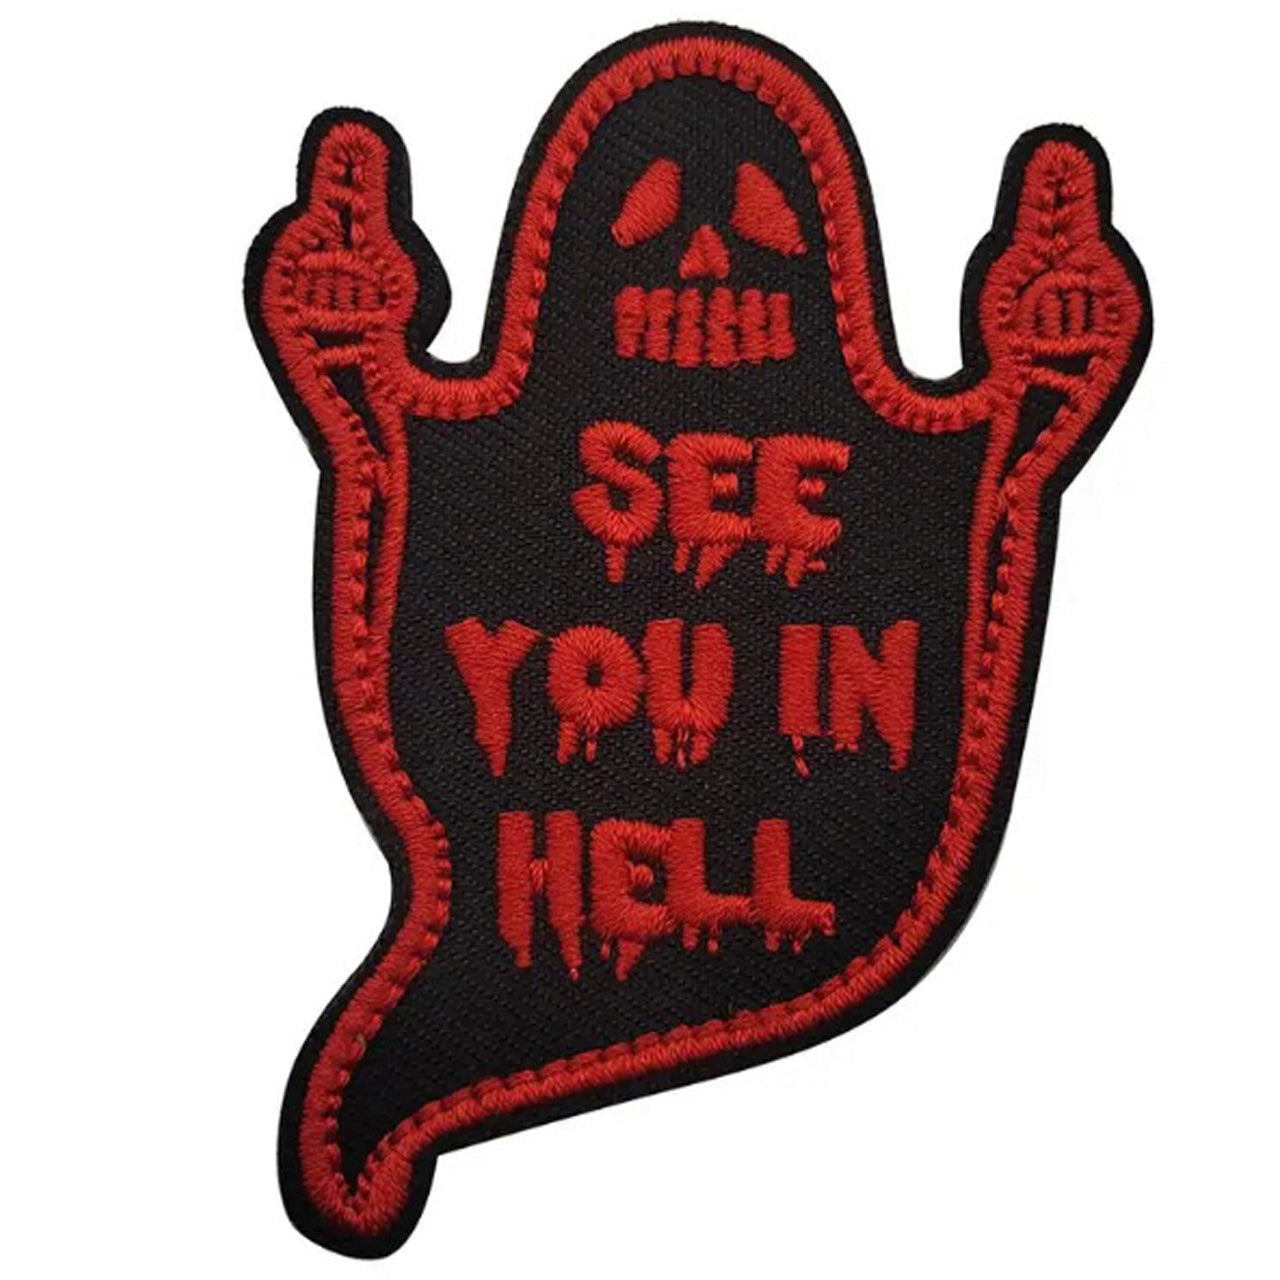 Elevate your gear to the next level with the See You In Hell Embroidery Patch Hook & Loop. Easily attach it to any piece of field gear, clothing, or create a unique patch display! Infuse some fun and madness into your style today. www.defenceqstore.com.au